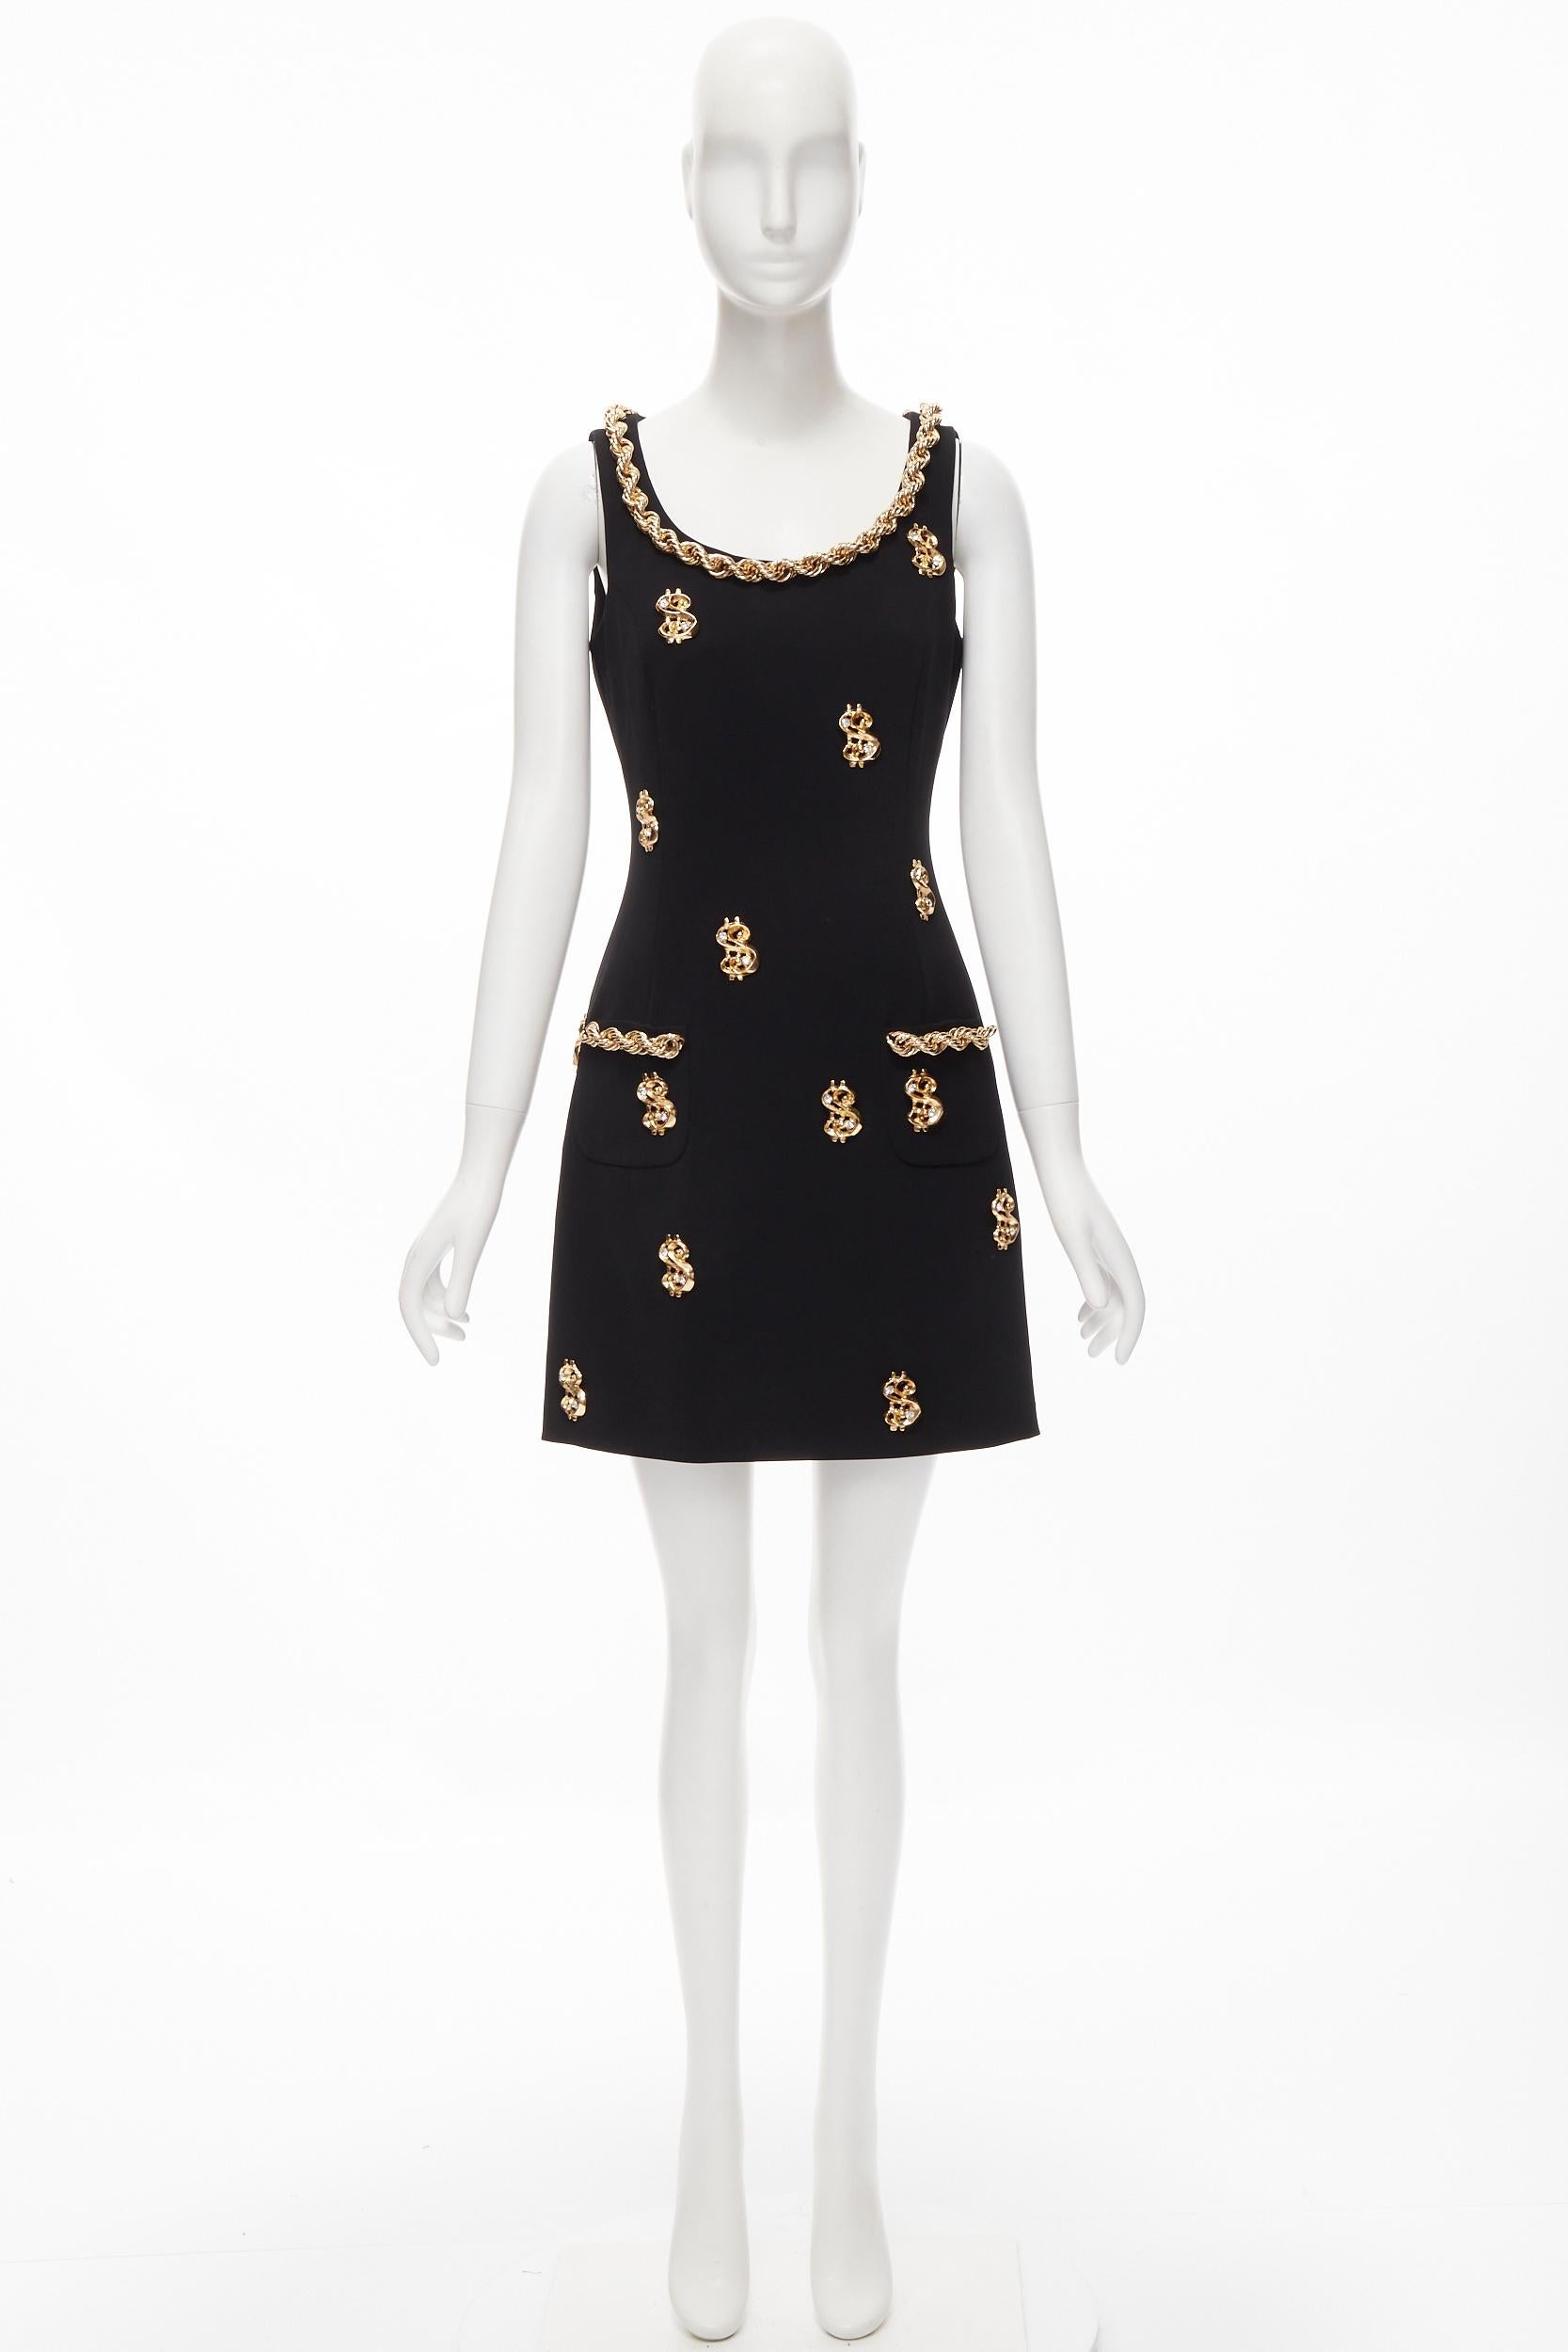 new MOSCHINO Couture! 2019 Runway gold crystal dollar sign dress Kylie IT40 S 2